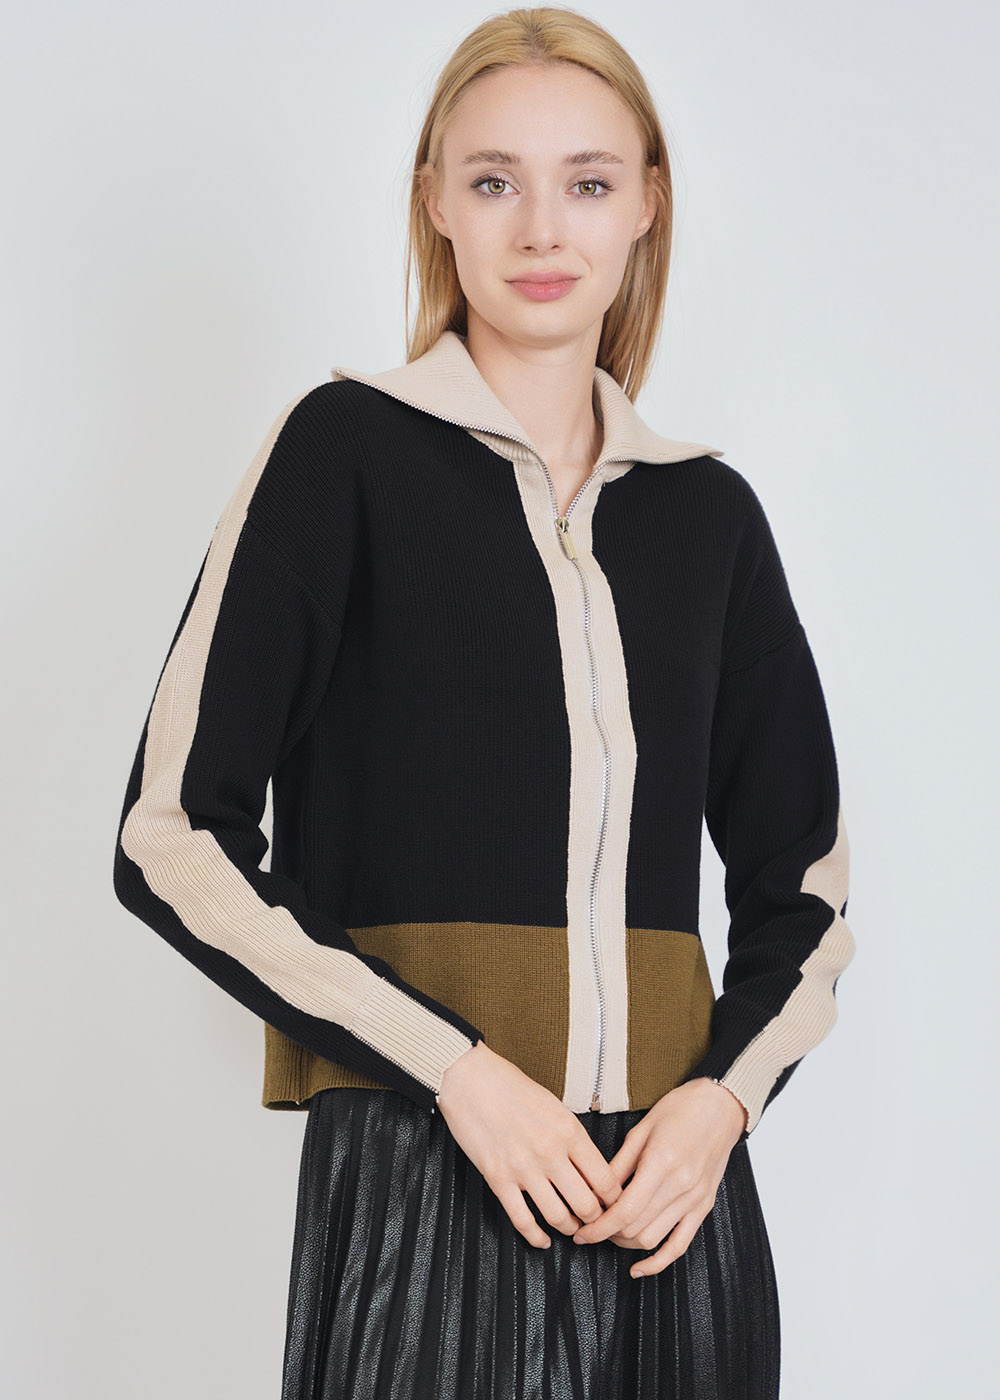 Black Cardigan with Elevated Neck & Creamy Touches